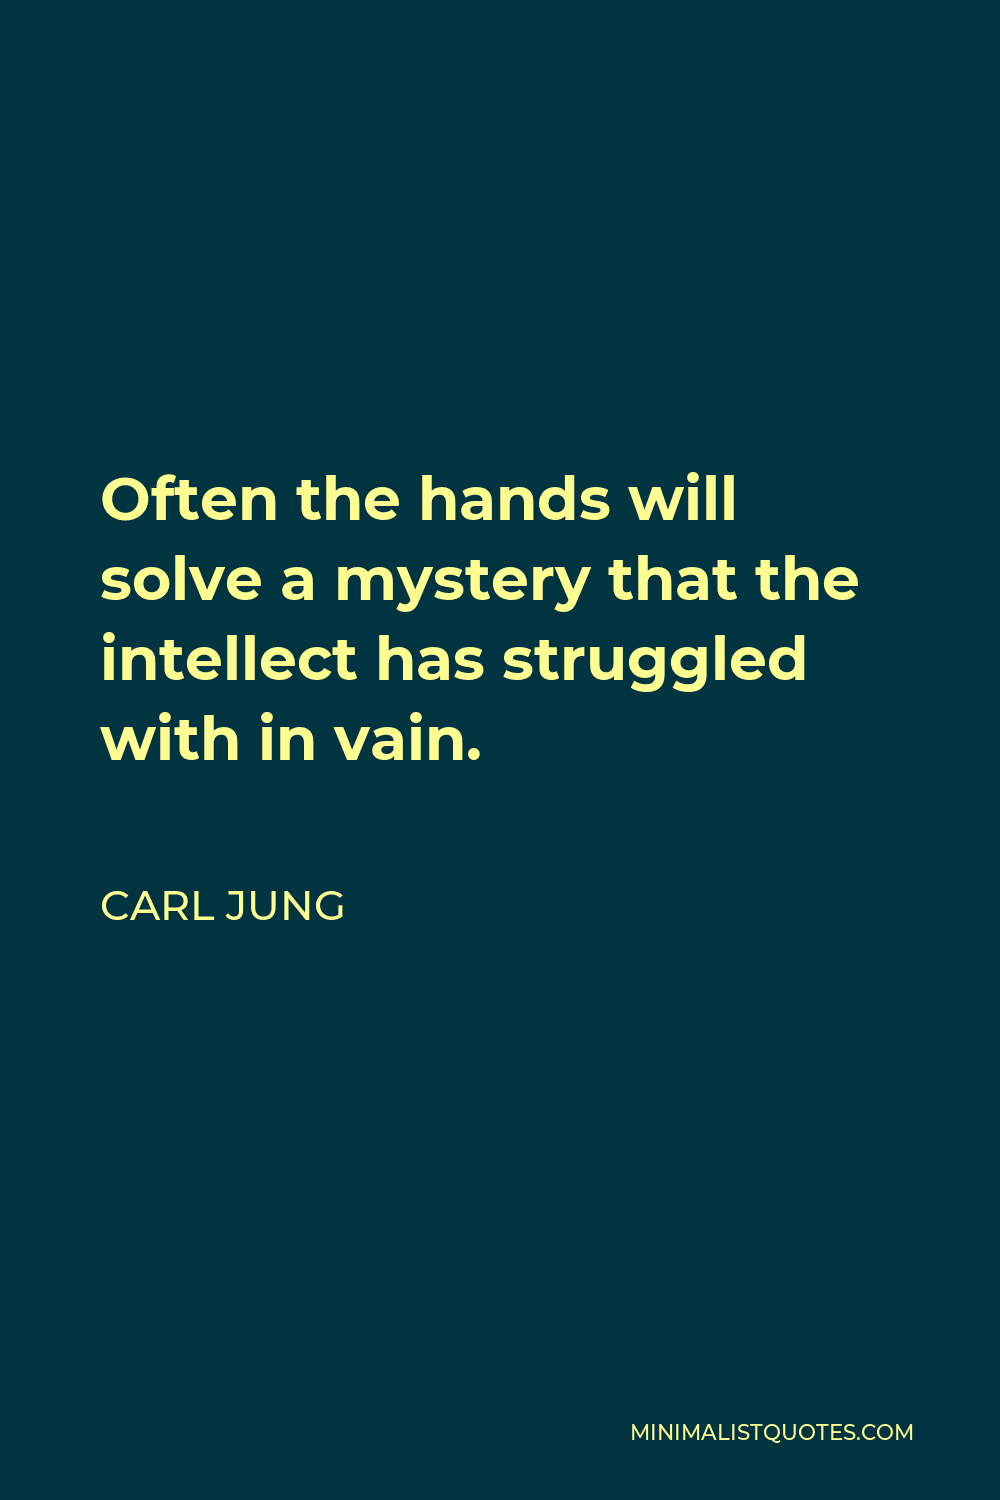 Carl Jung Quote - Often the hands will solve a mystery that the intellect has struggled with in vain.